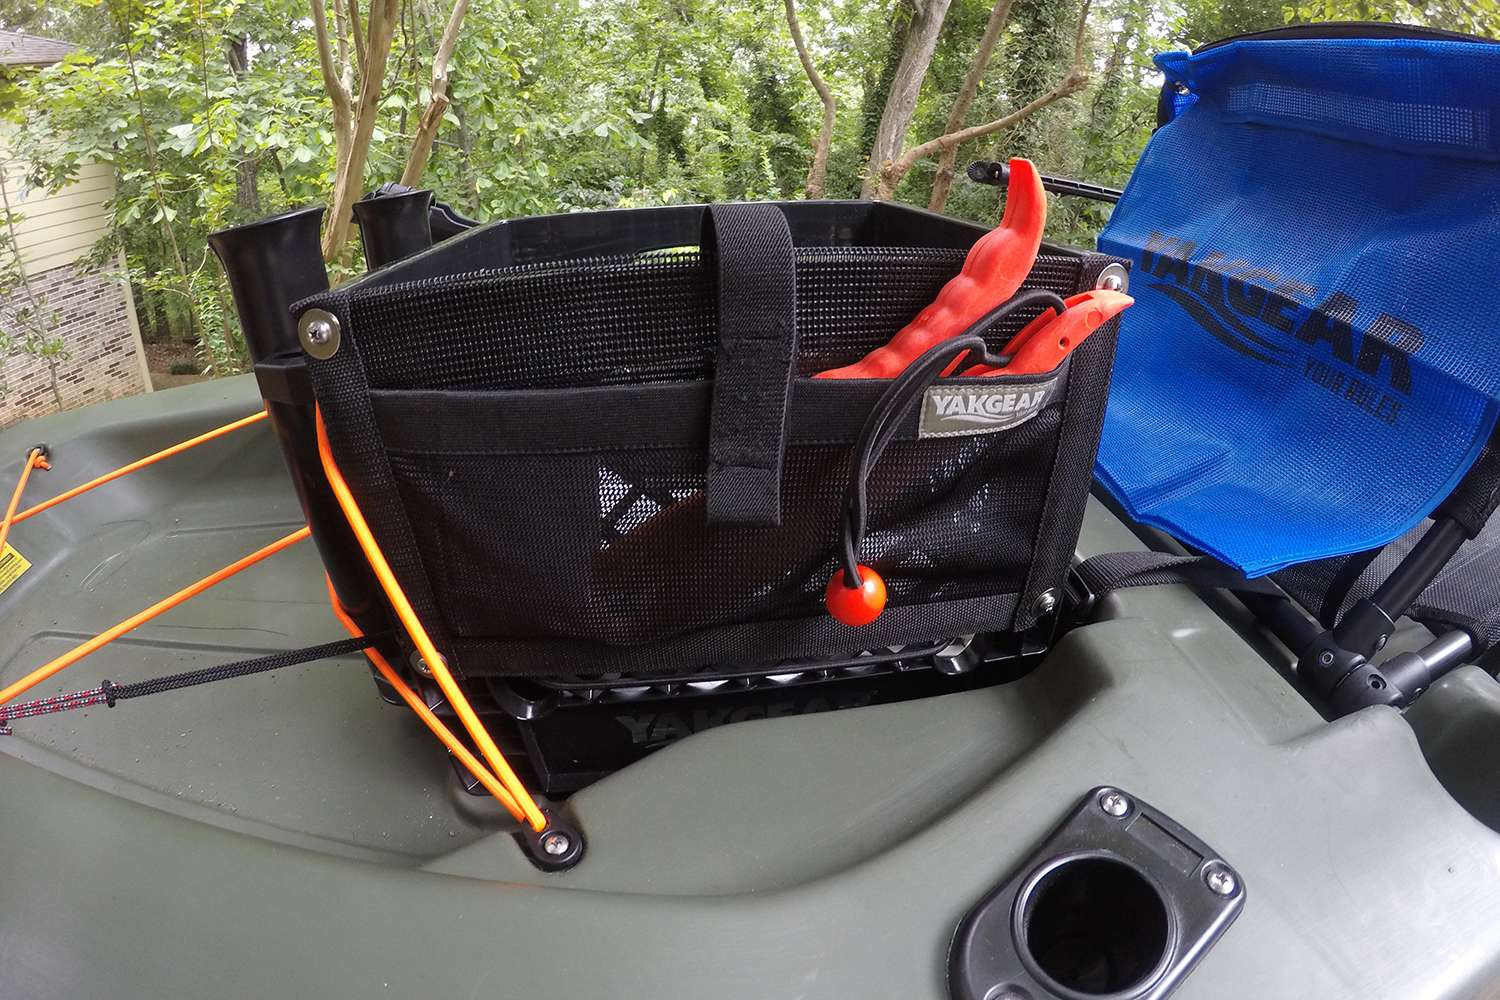 On this side of the crate is a tool pouch, good for holding pliers or lip grippers, or whatever you might need. 